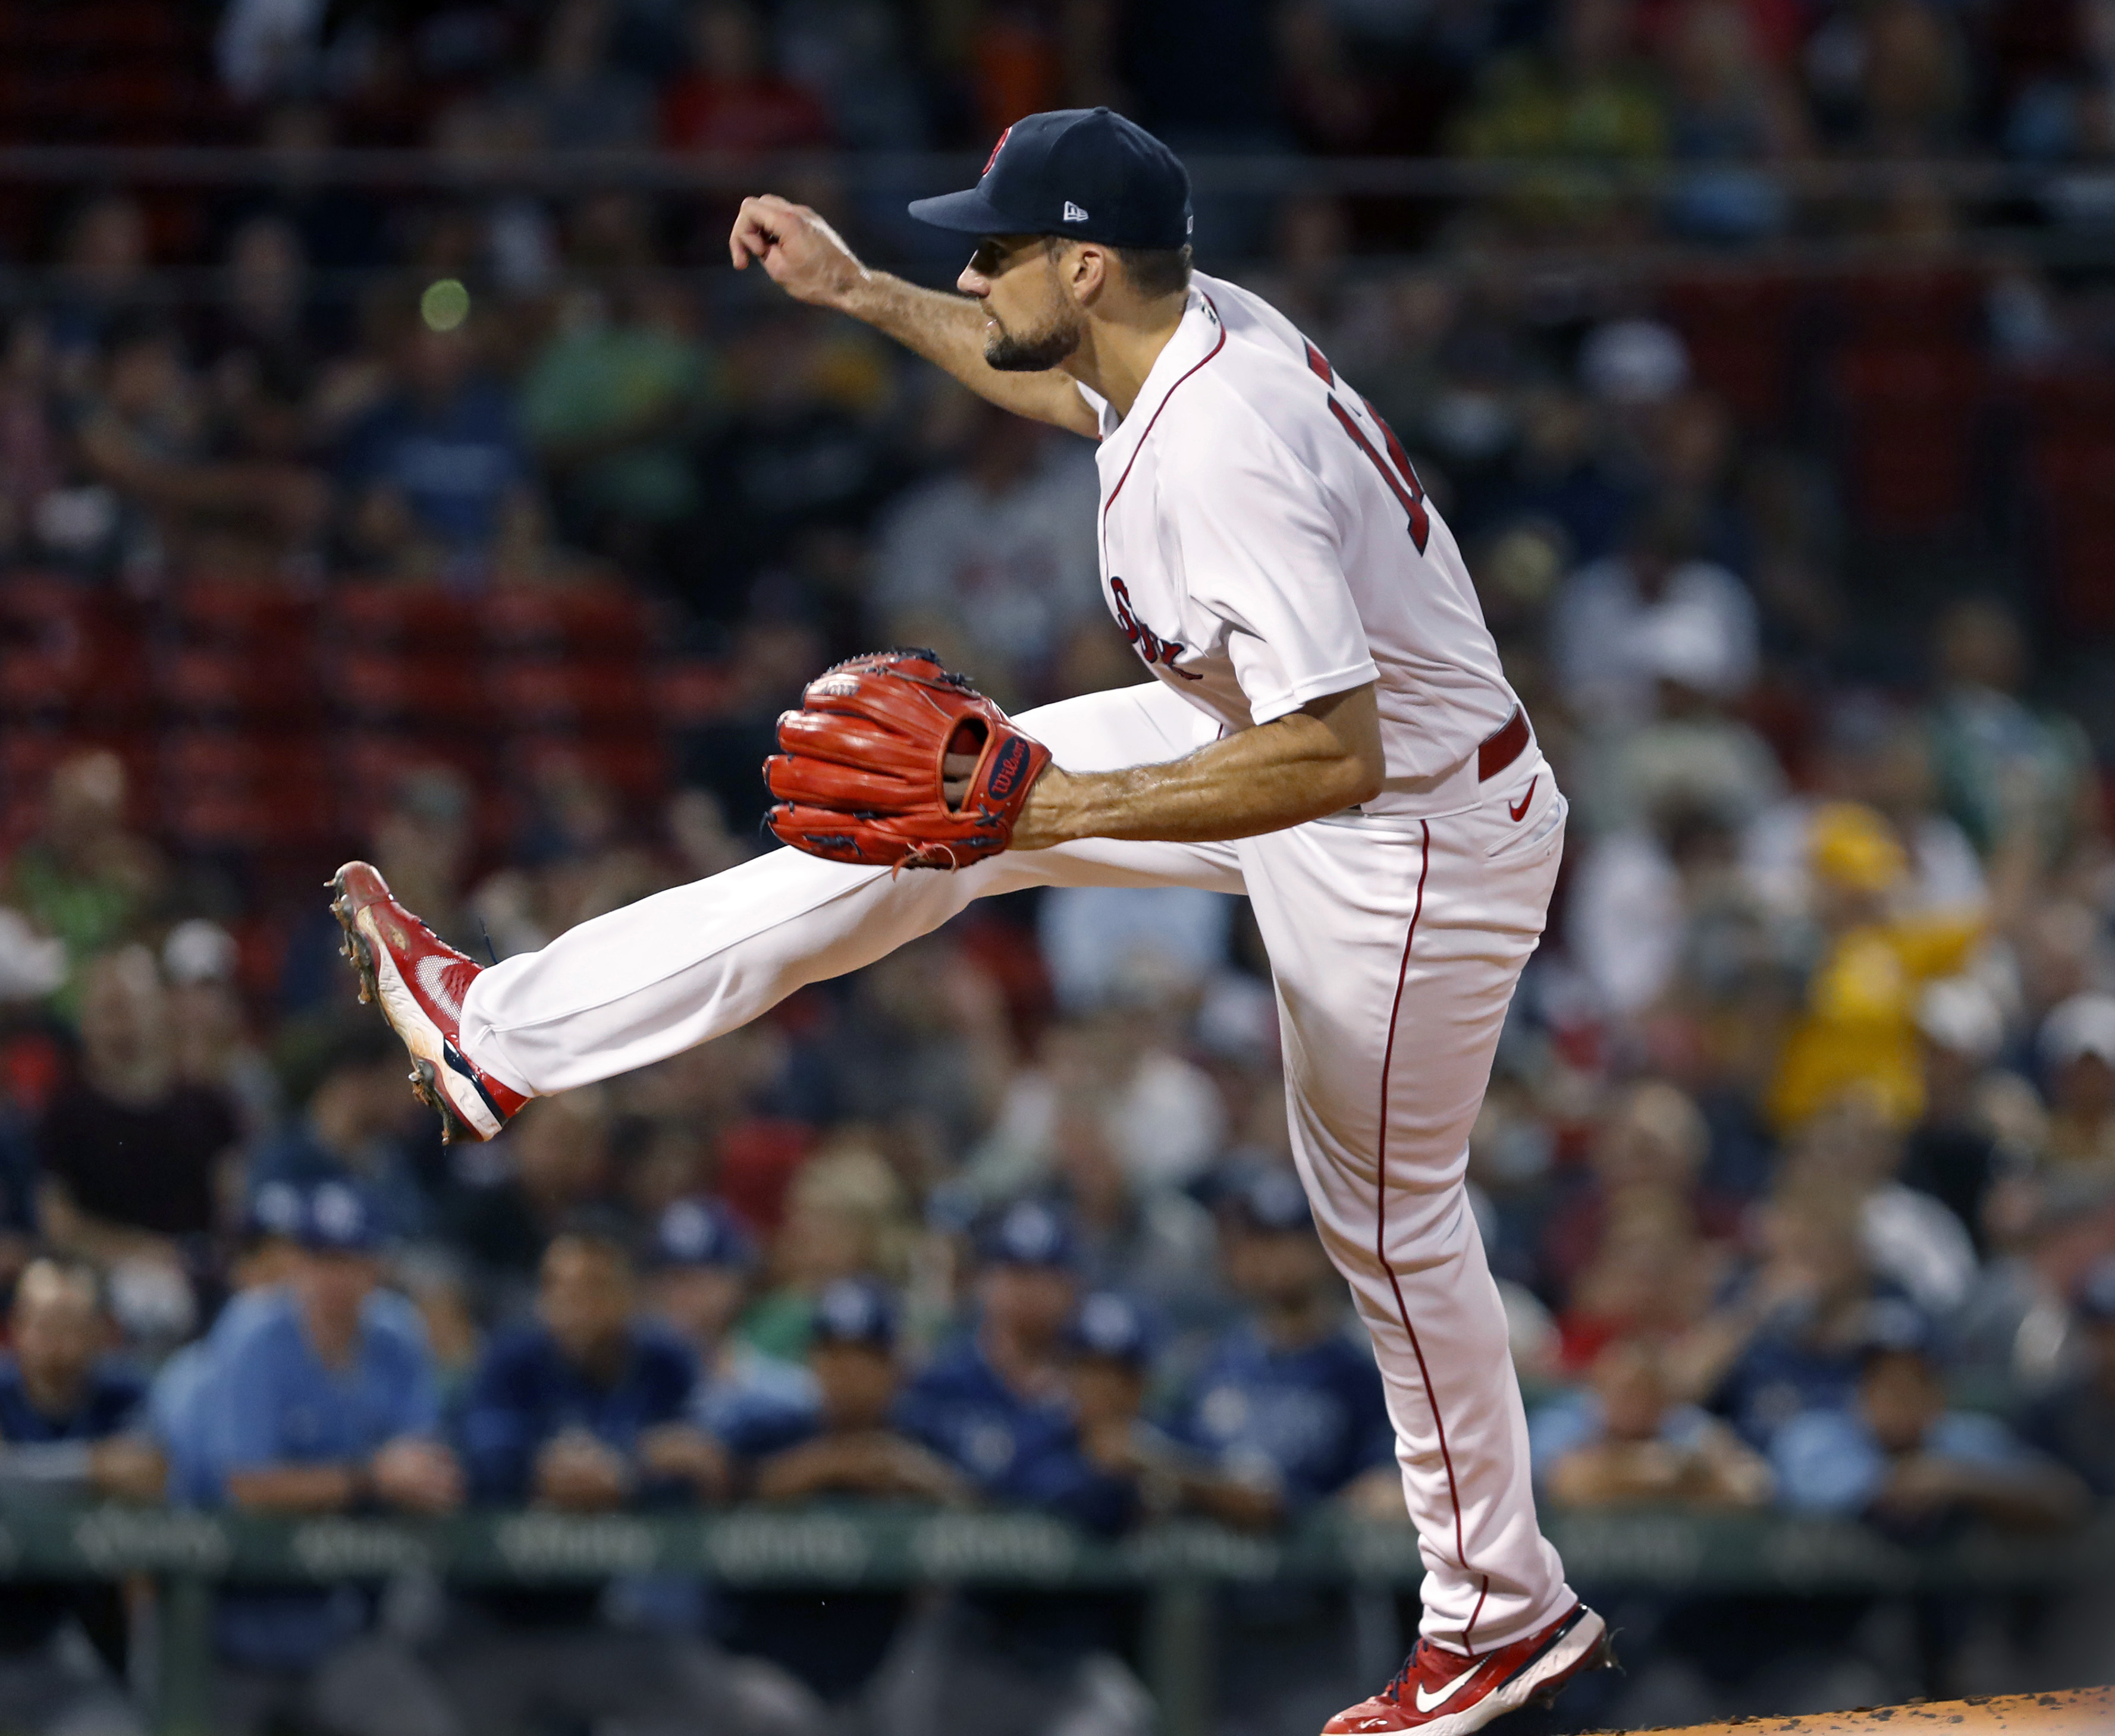 Nate Eovaldi was carving up the Blue Jays, but the bullpen couldn